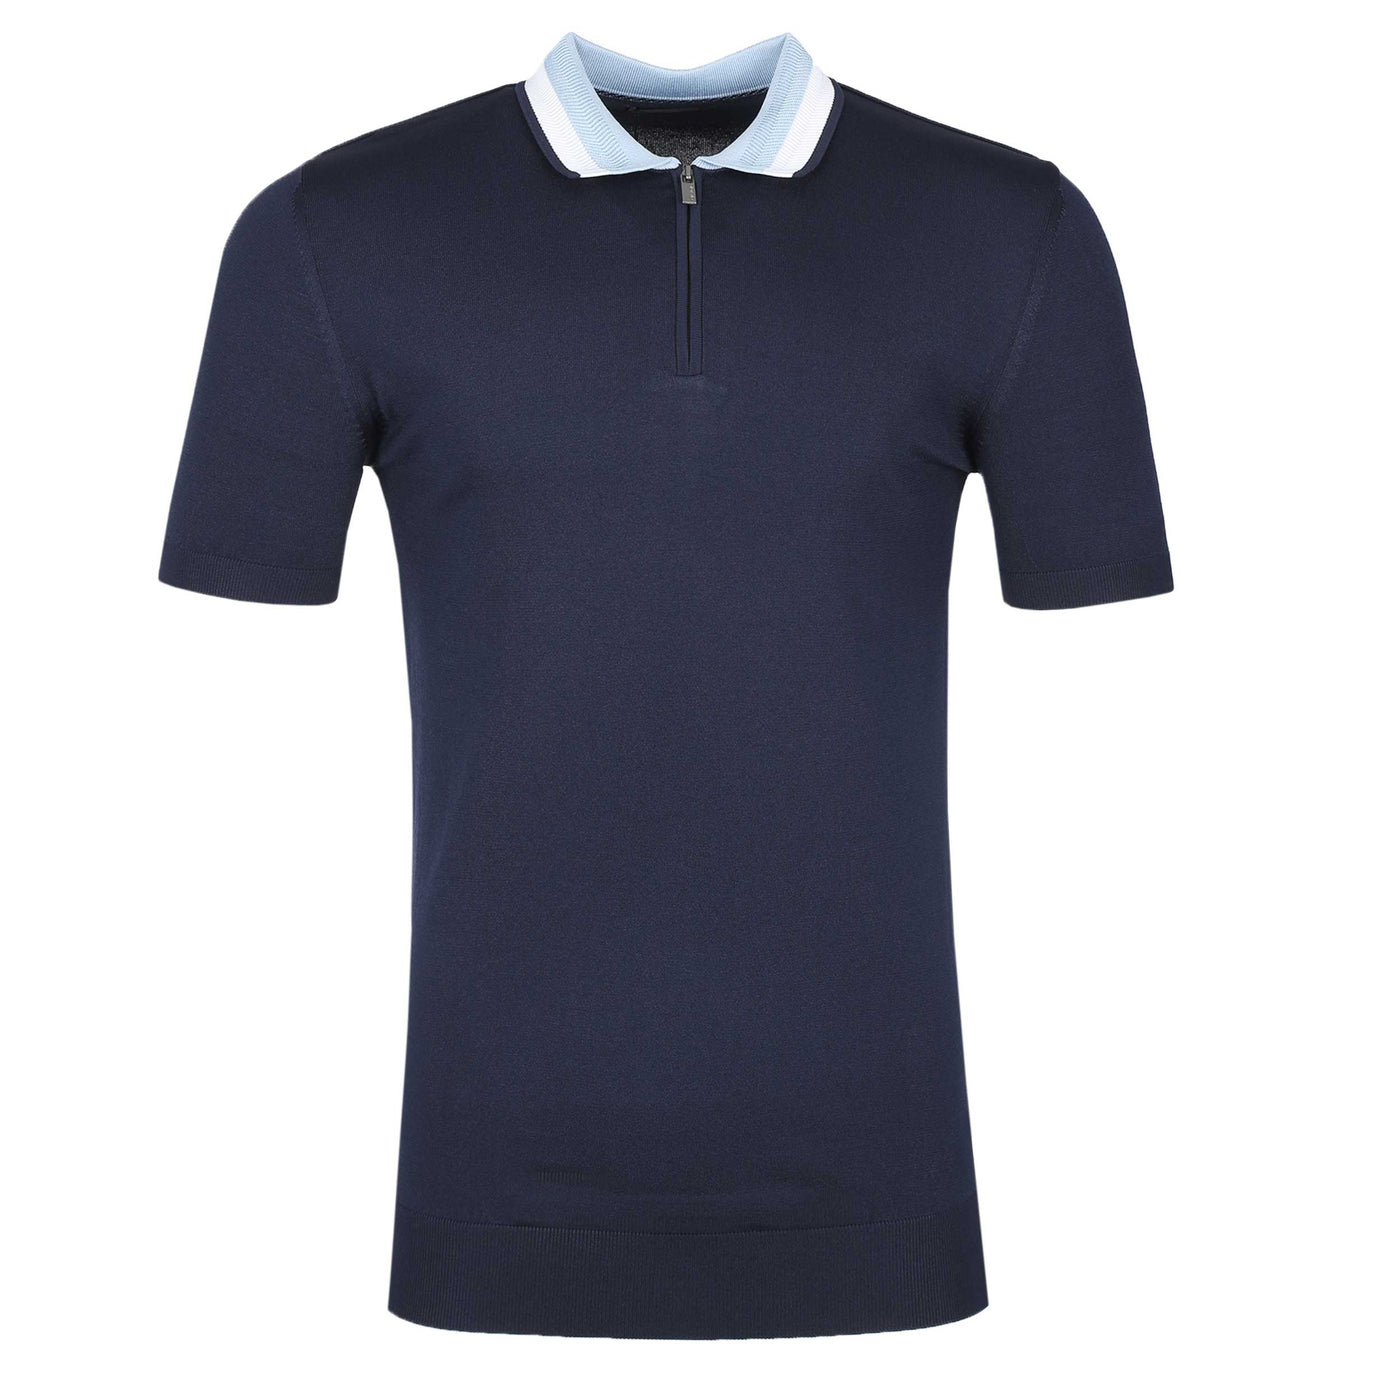 Remus Uomo Contrast Collar Knitted Zip Polo Shirt in Navy